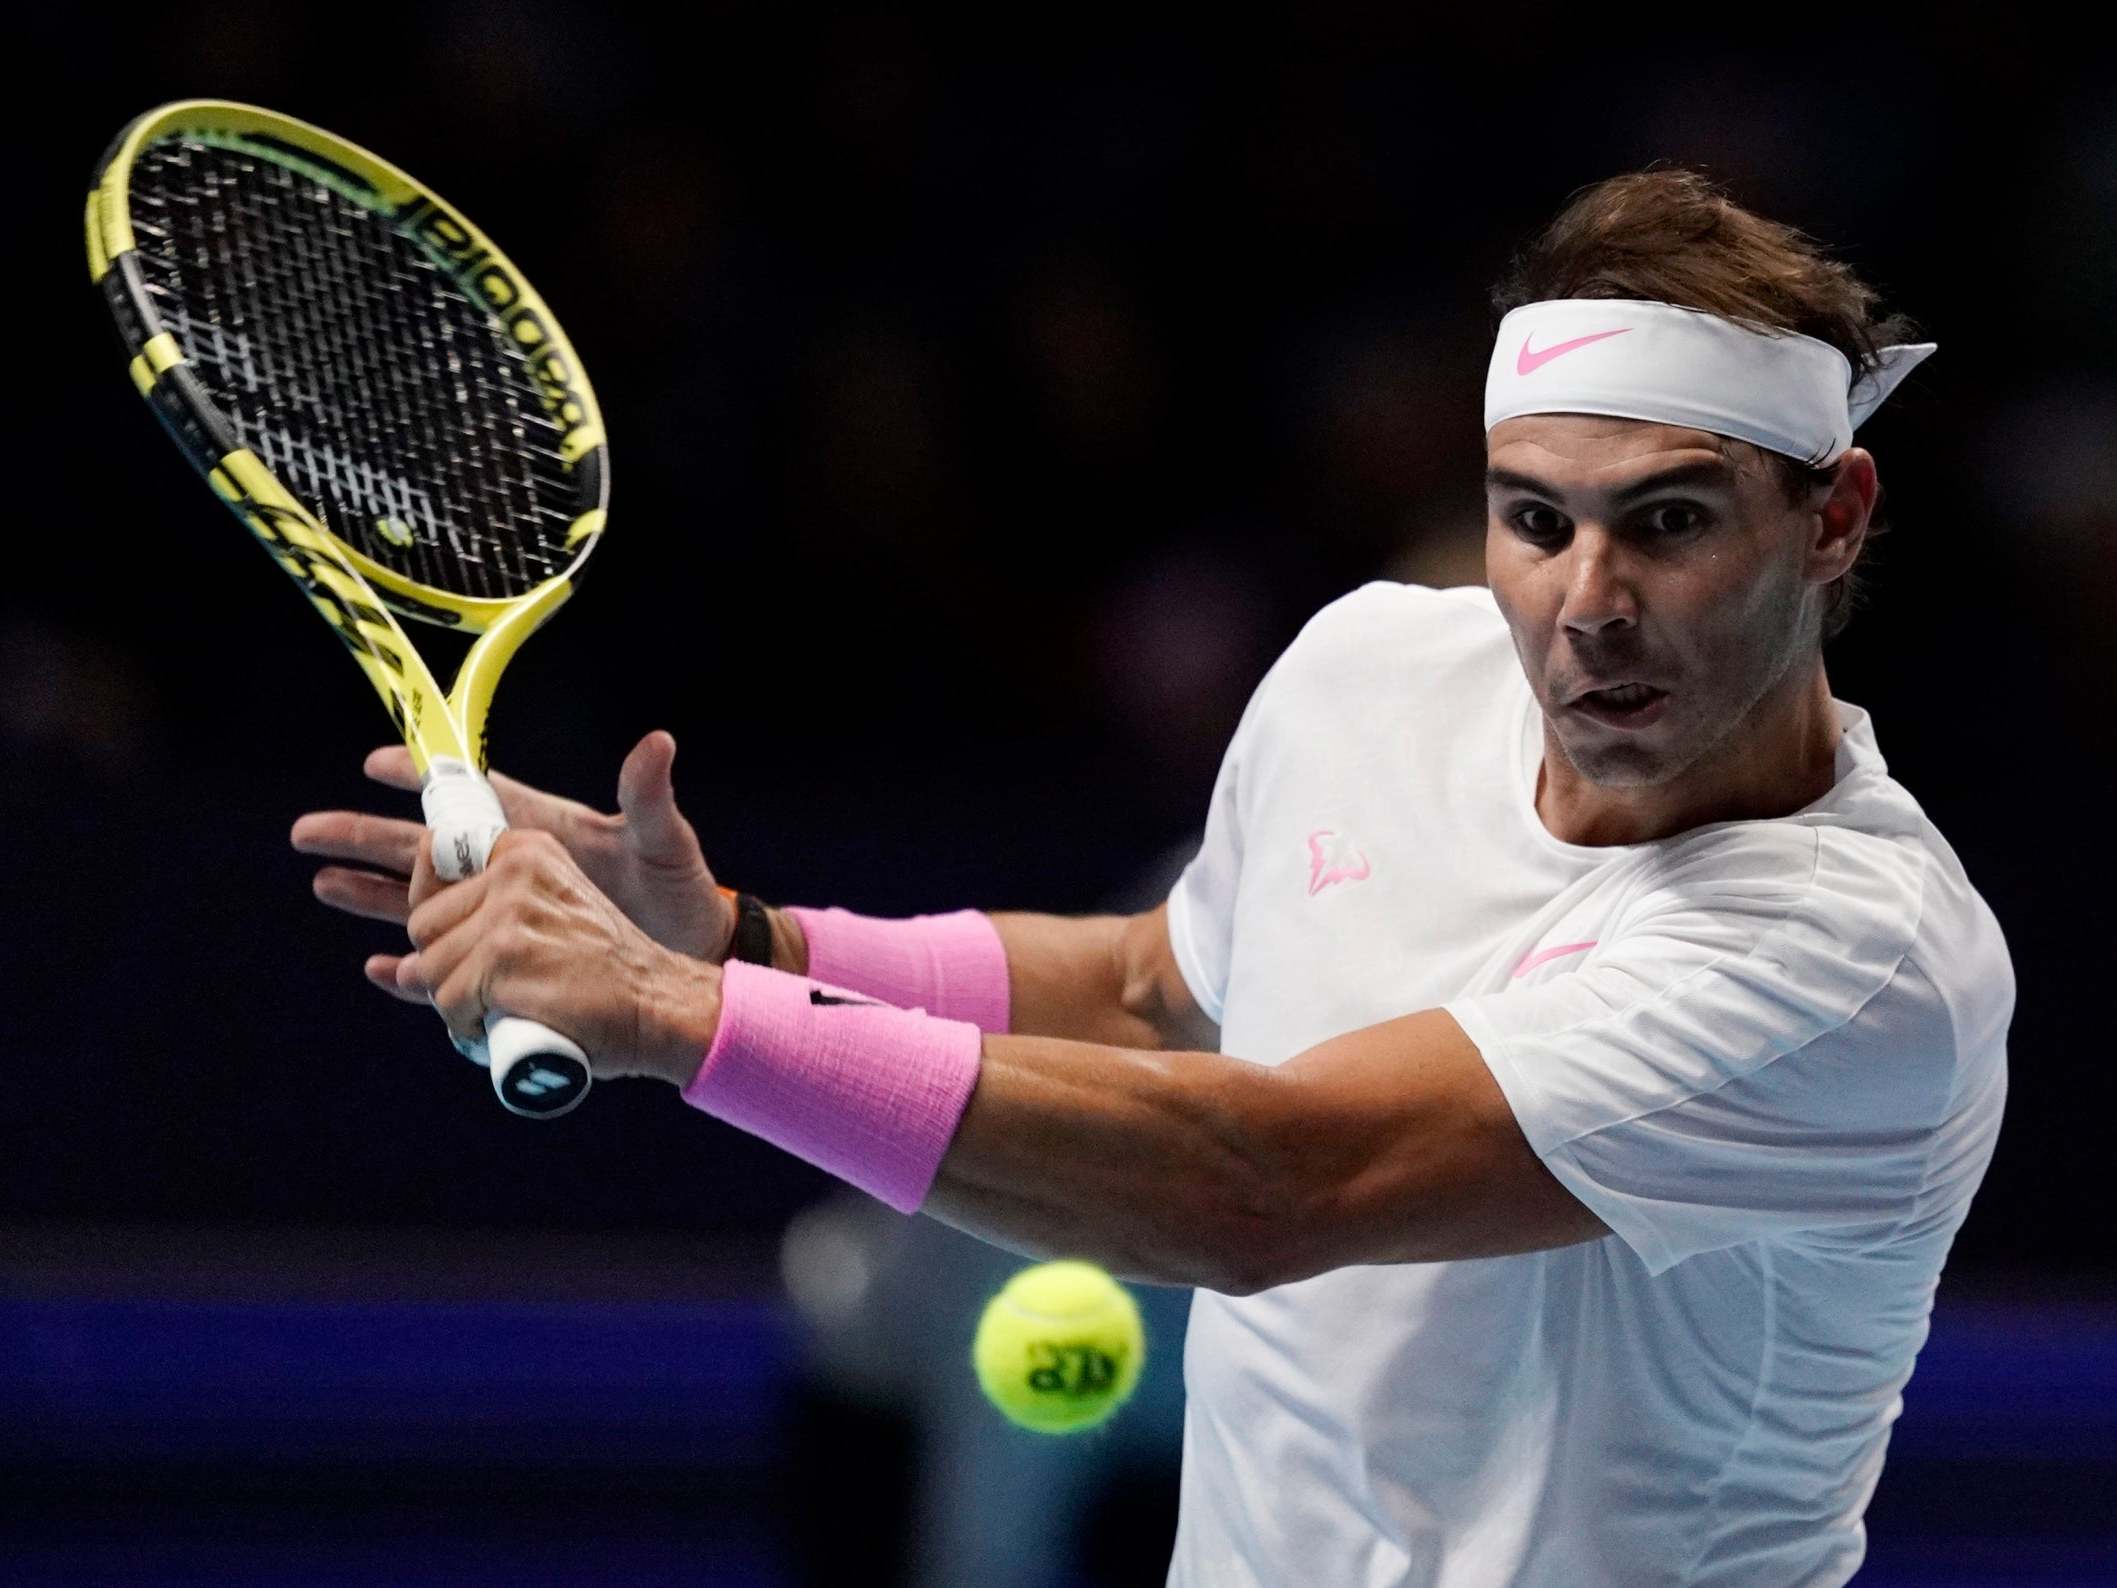 Nadal has suffered from injuries in recent weeks